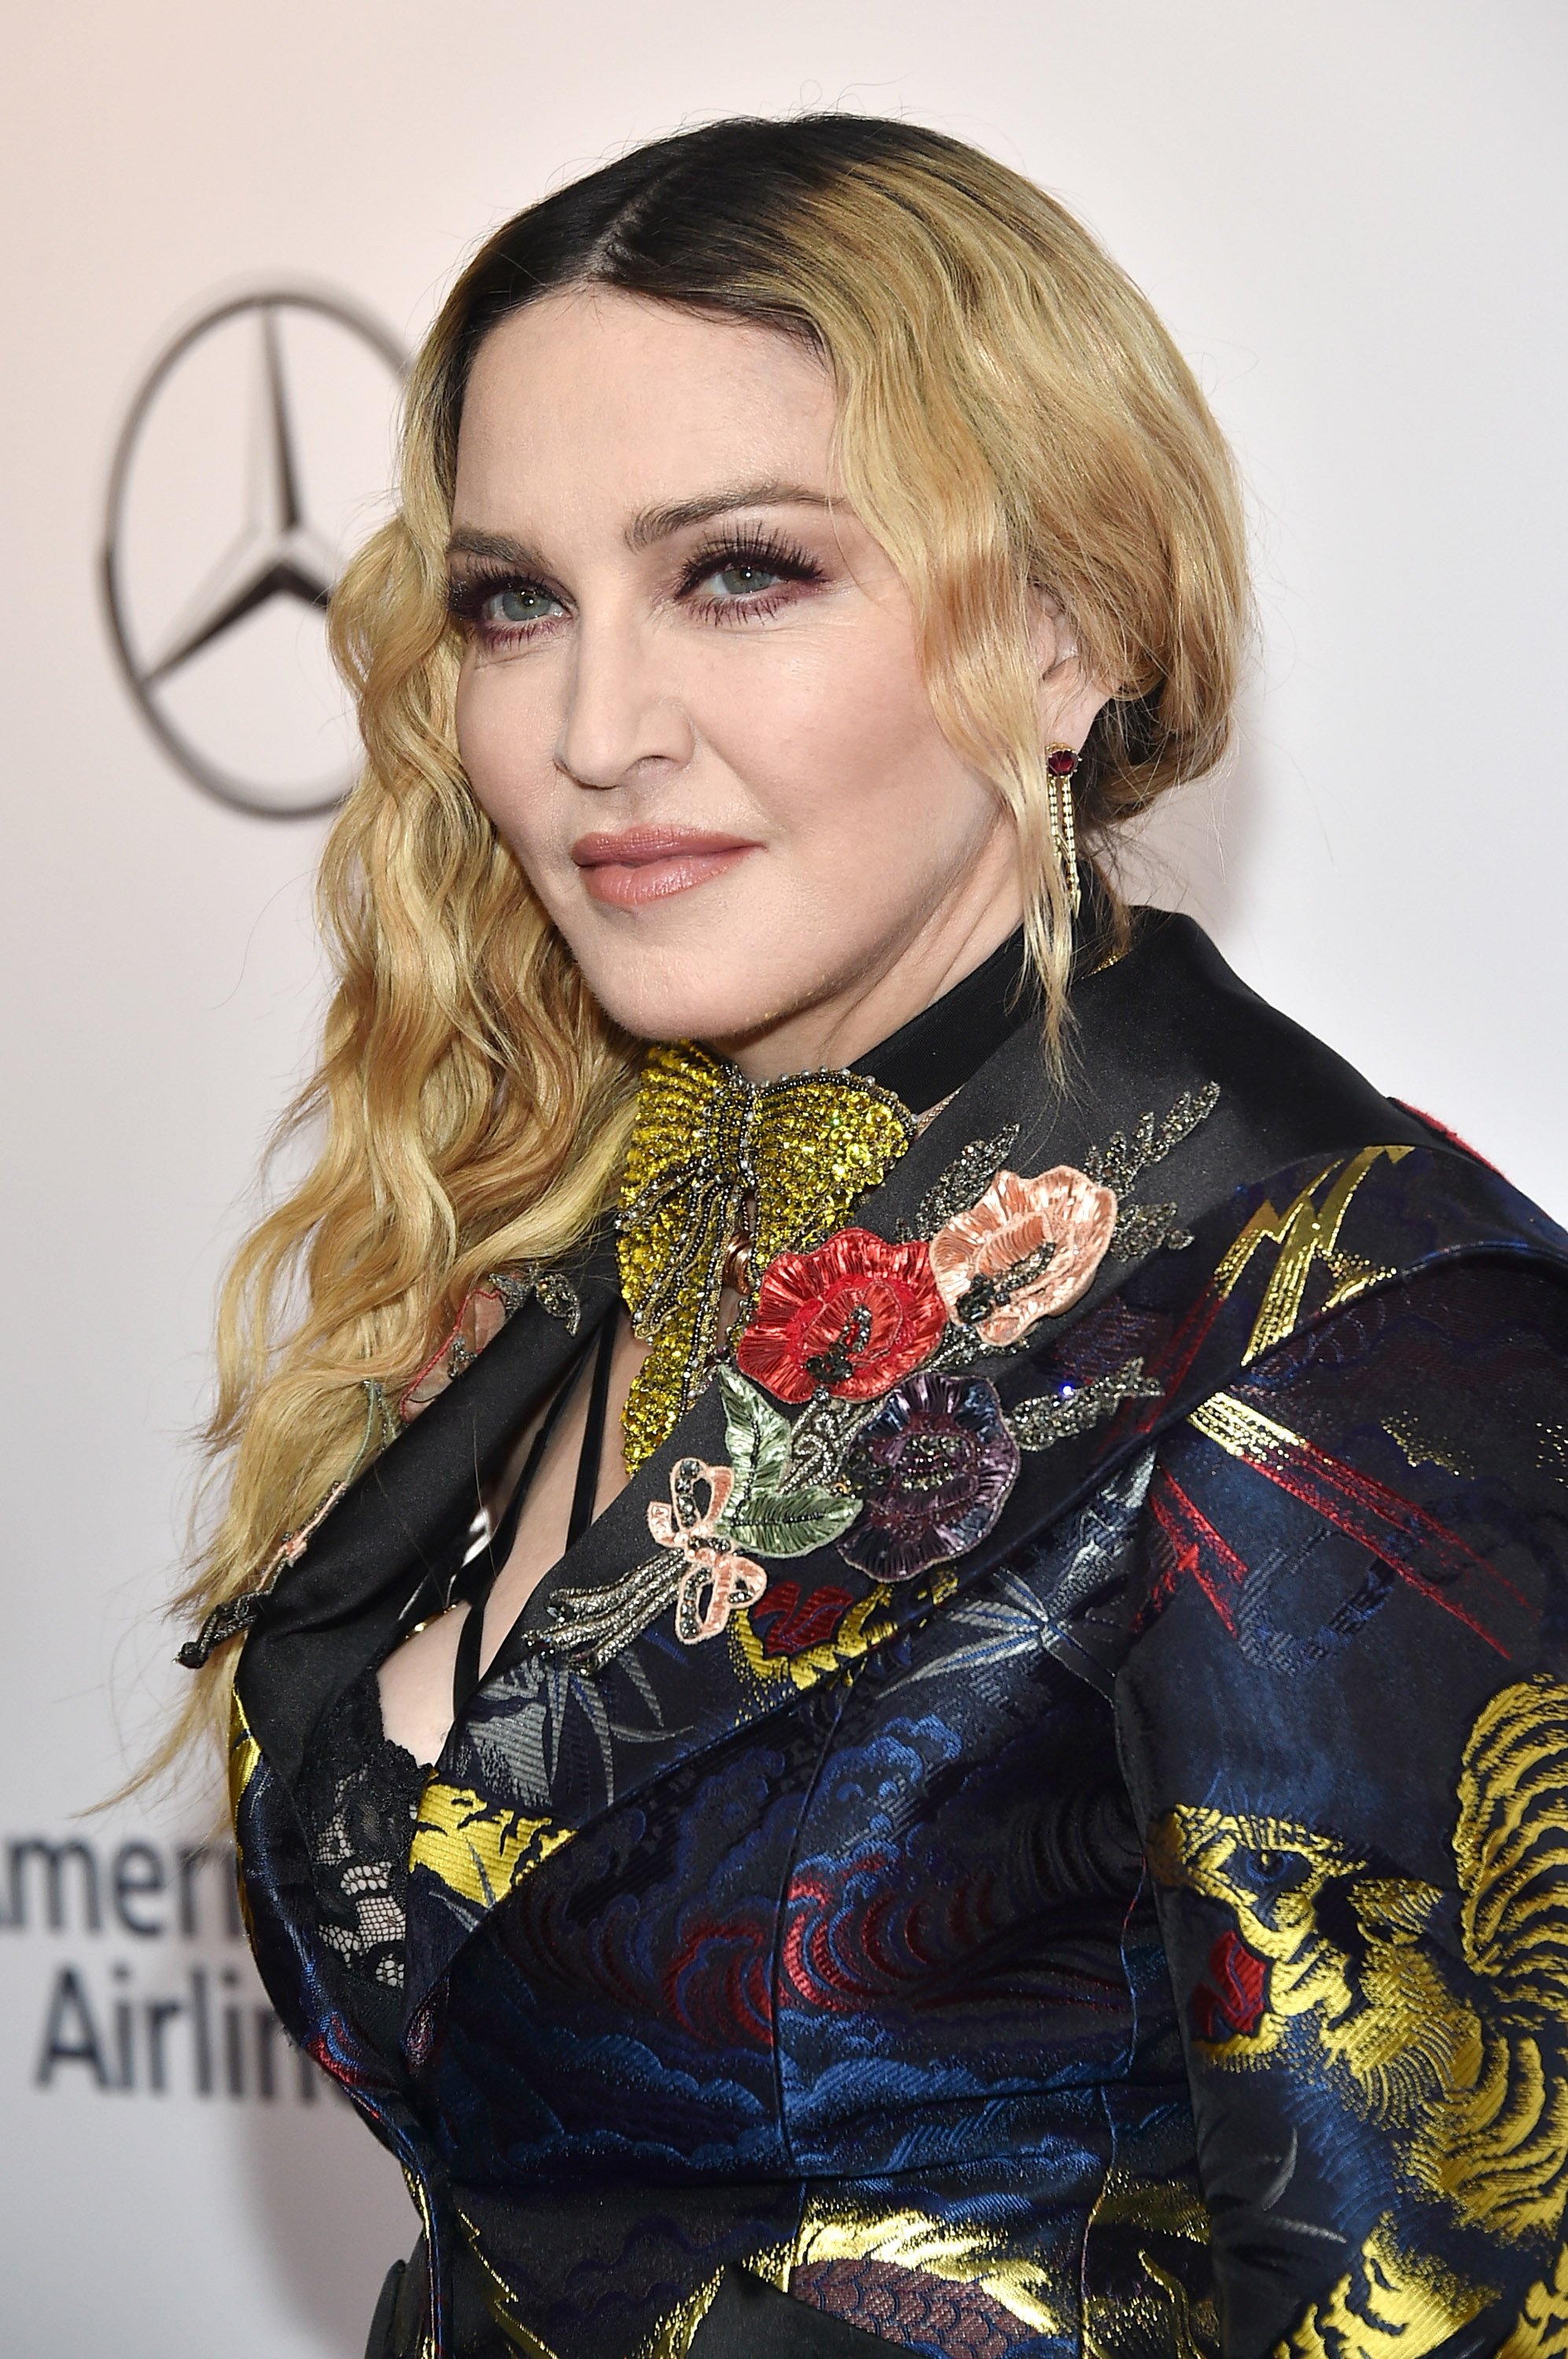 Madonna attends the Billboard Women in Music 2016 event on December 9, 2016 in New York City